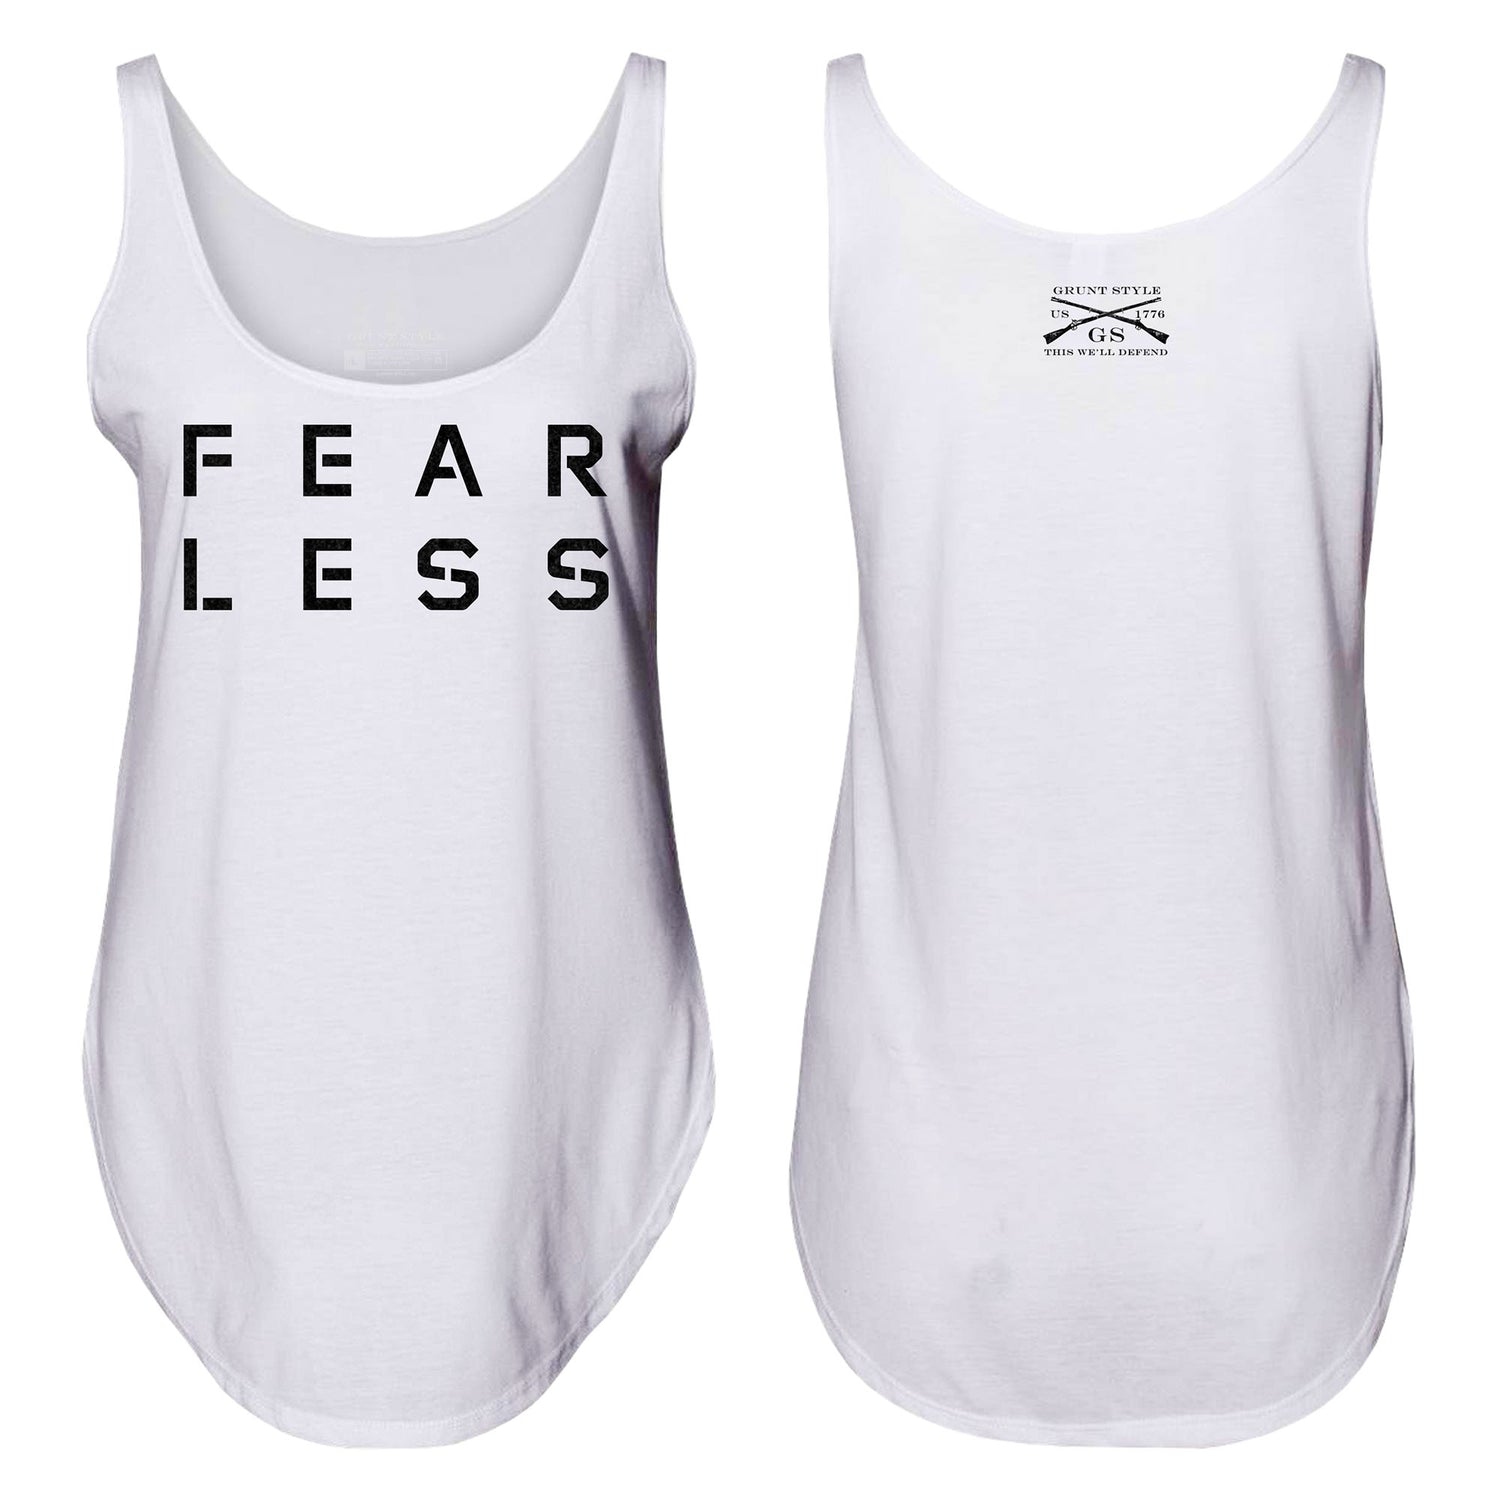 Fear Less Tank | Patriotic Tops for Women 